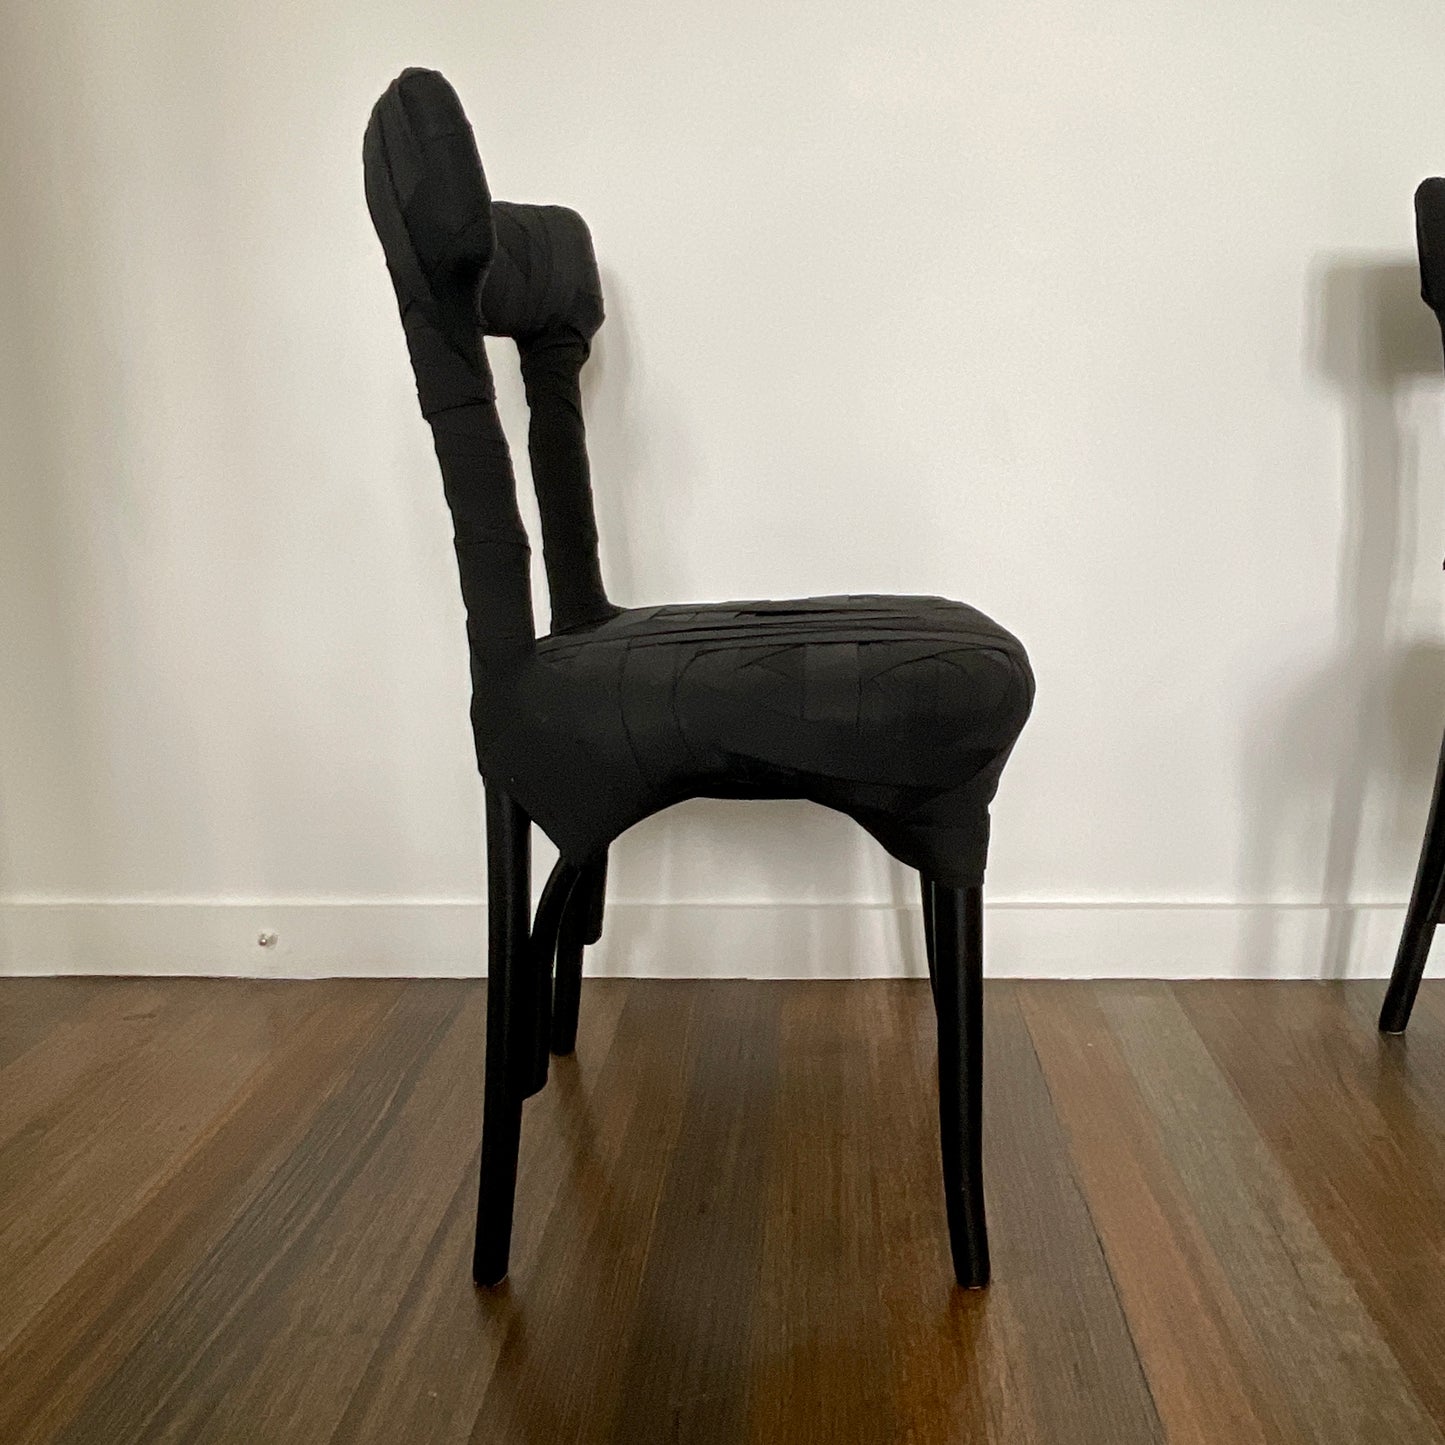 Load image into Gallery viewer, Set of FOUR Mummy Chairs by Peter Traag for Edra (2 sets available)
